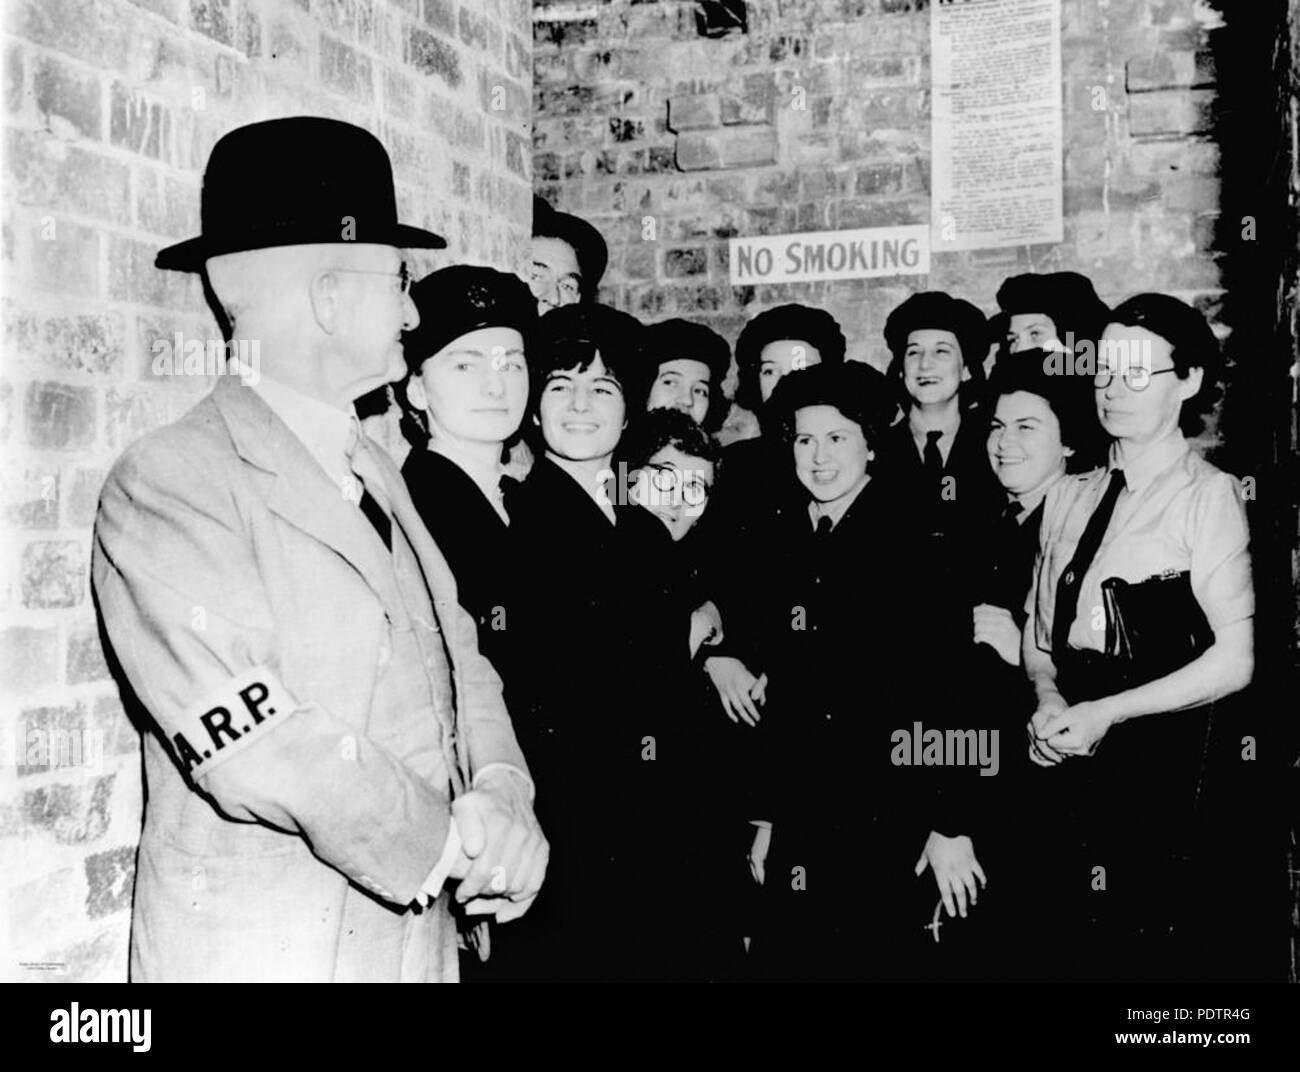 201 StateLibQld 1 103742 Air raid warden and members of the W.A.A.F in a Brisbane air raid shelter, 1942 Stock Photo